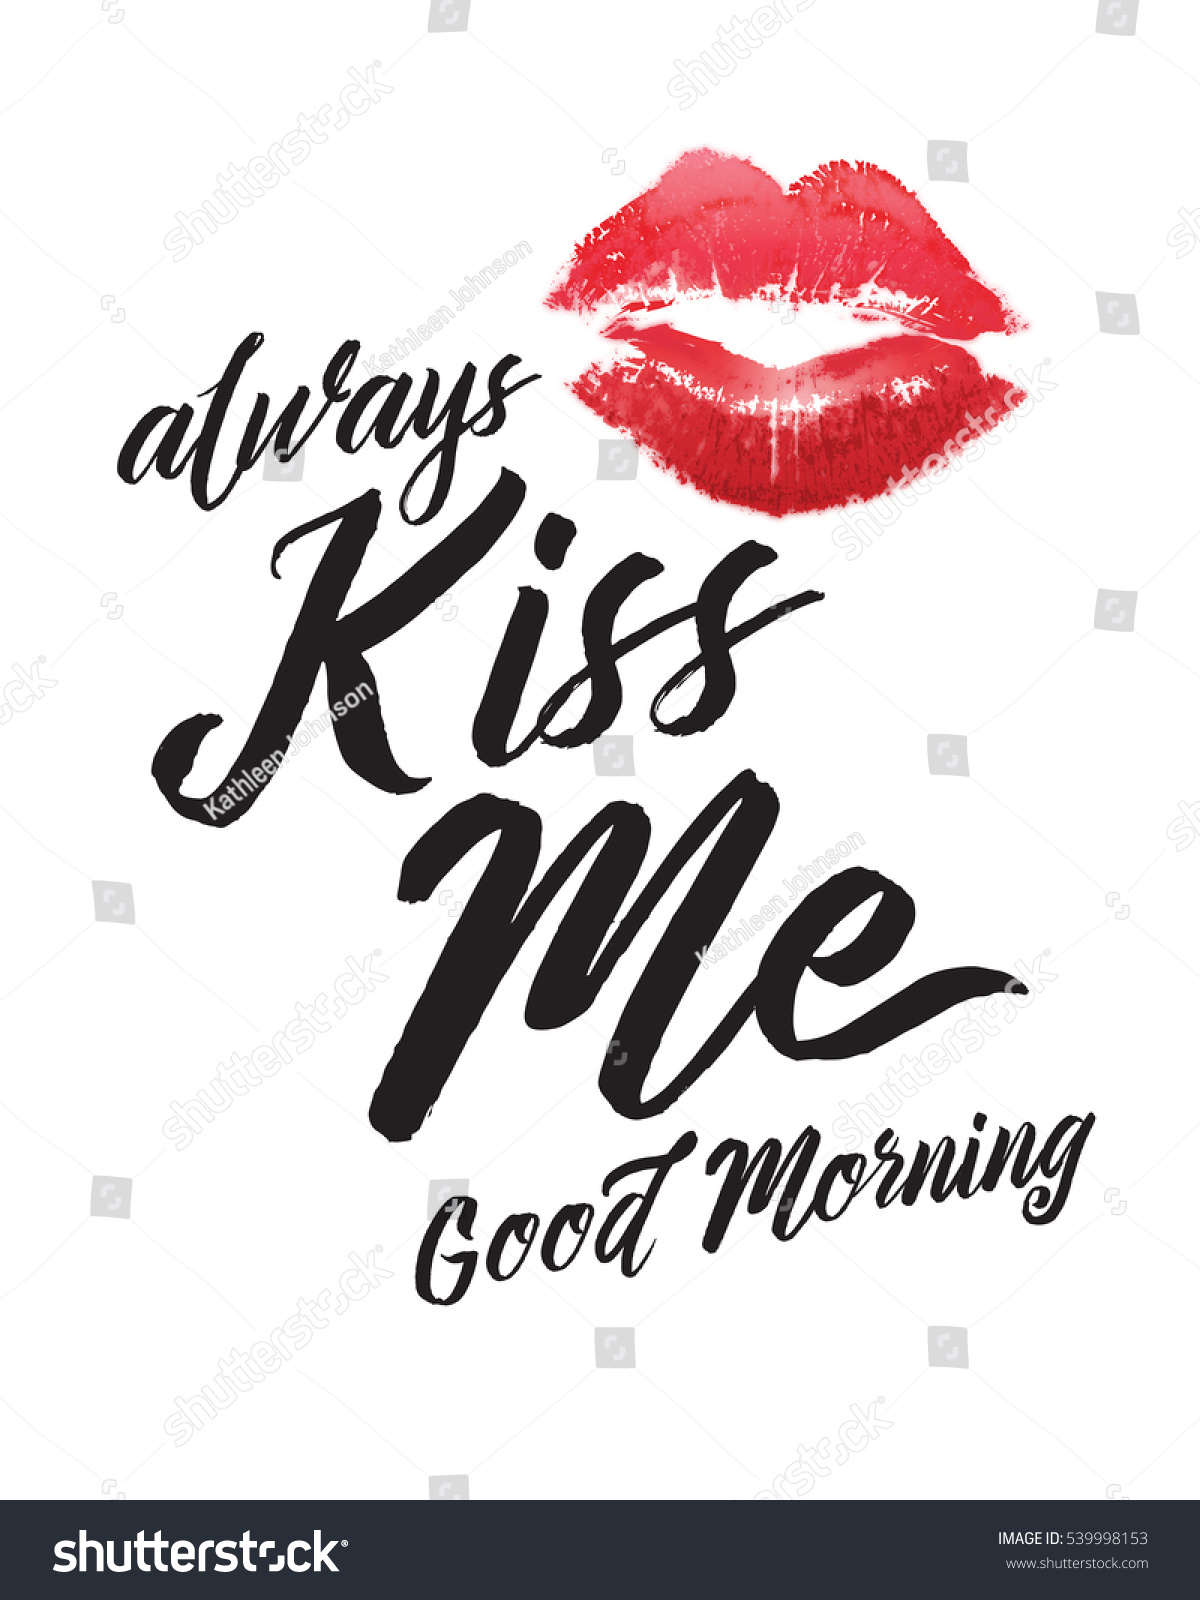 Lip Kiss Images Good Morning / free for commercial use high quality images.